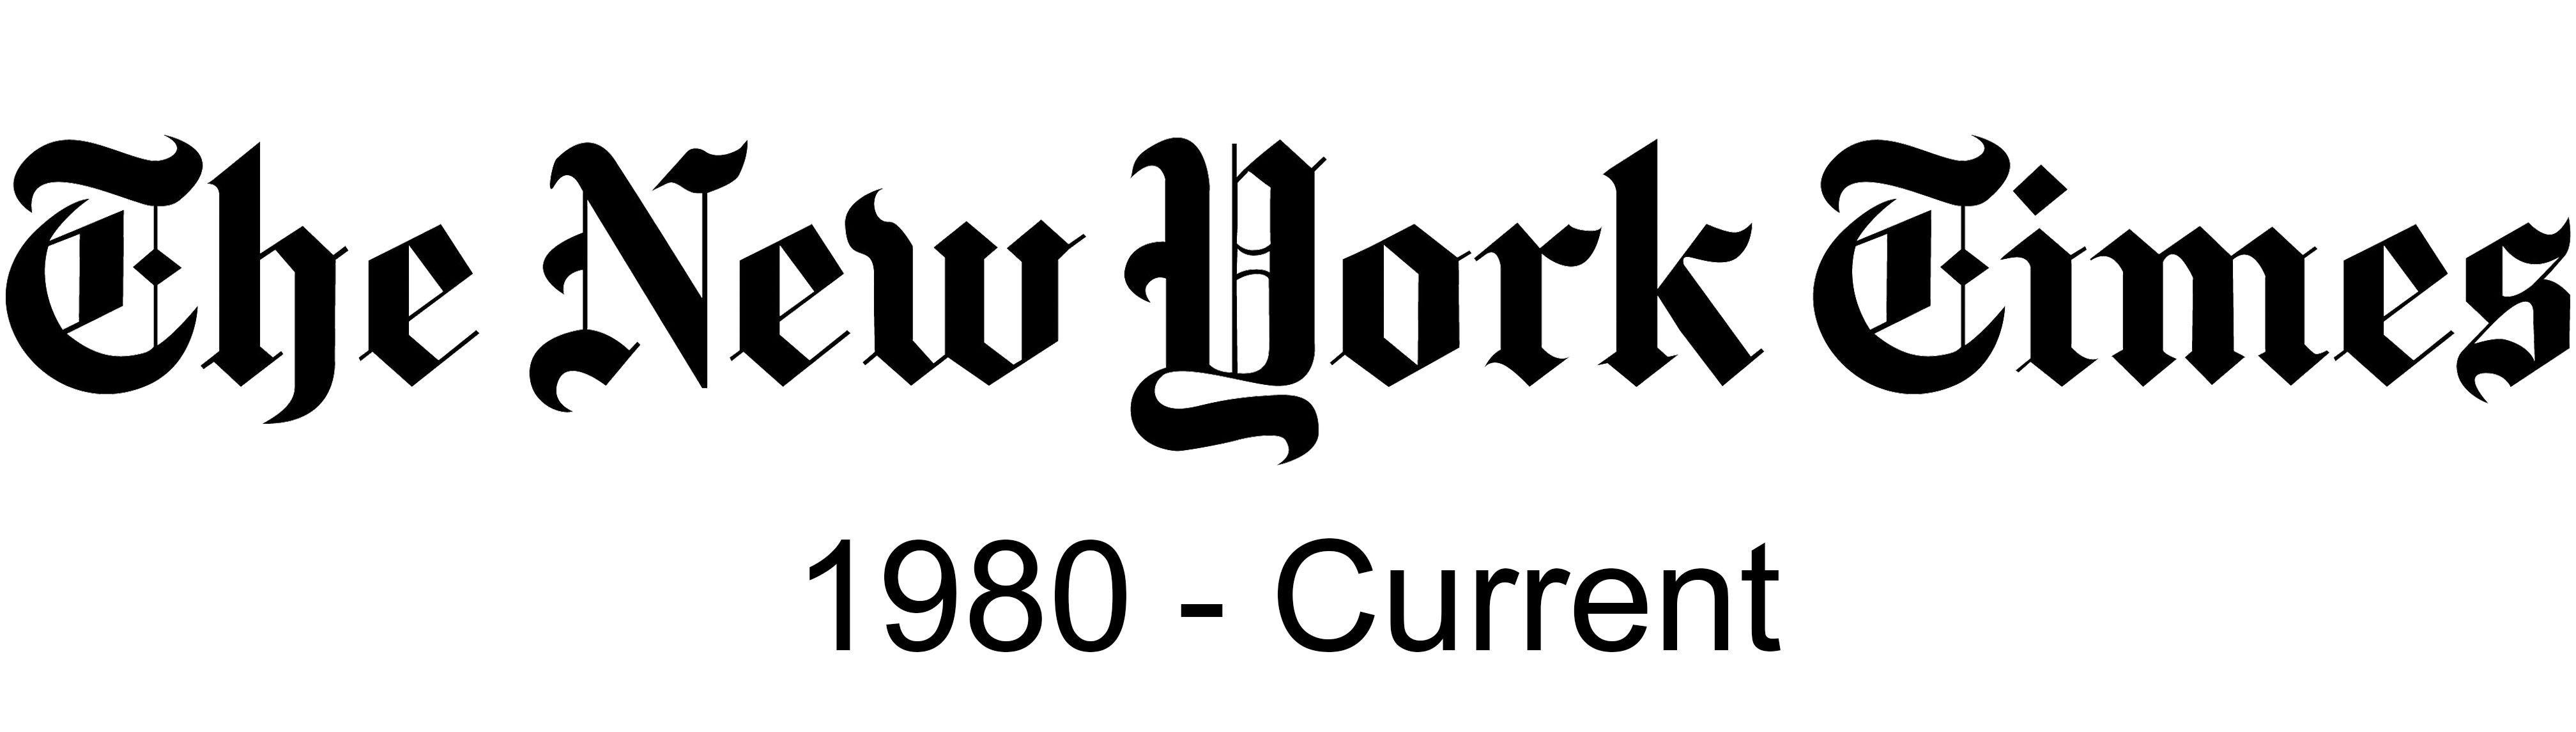 New York Times Logo - New York Times (1980 - Current) | Livebrary